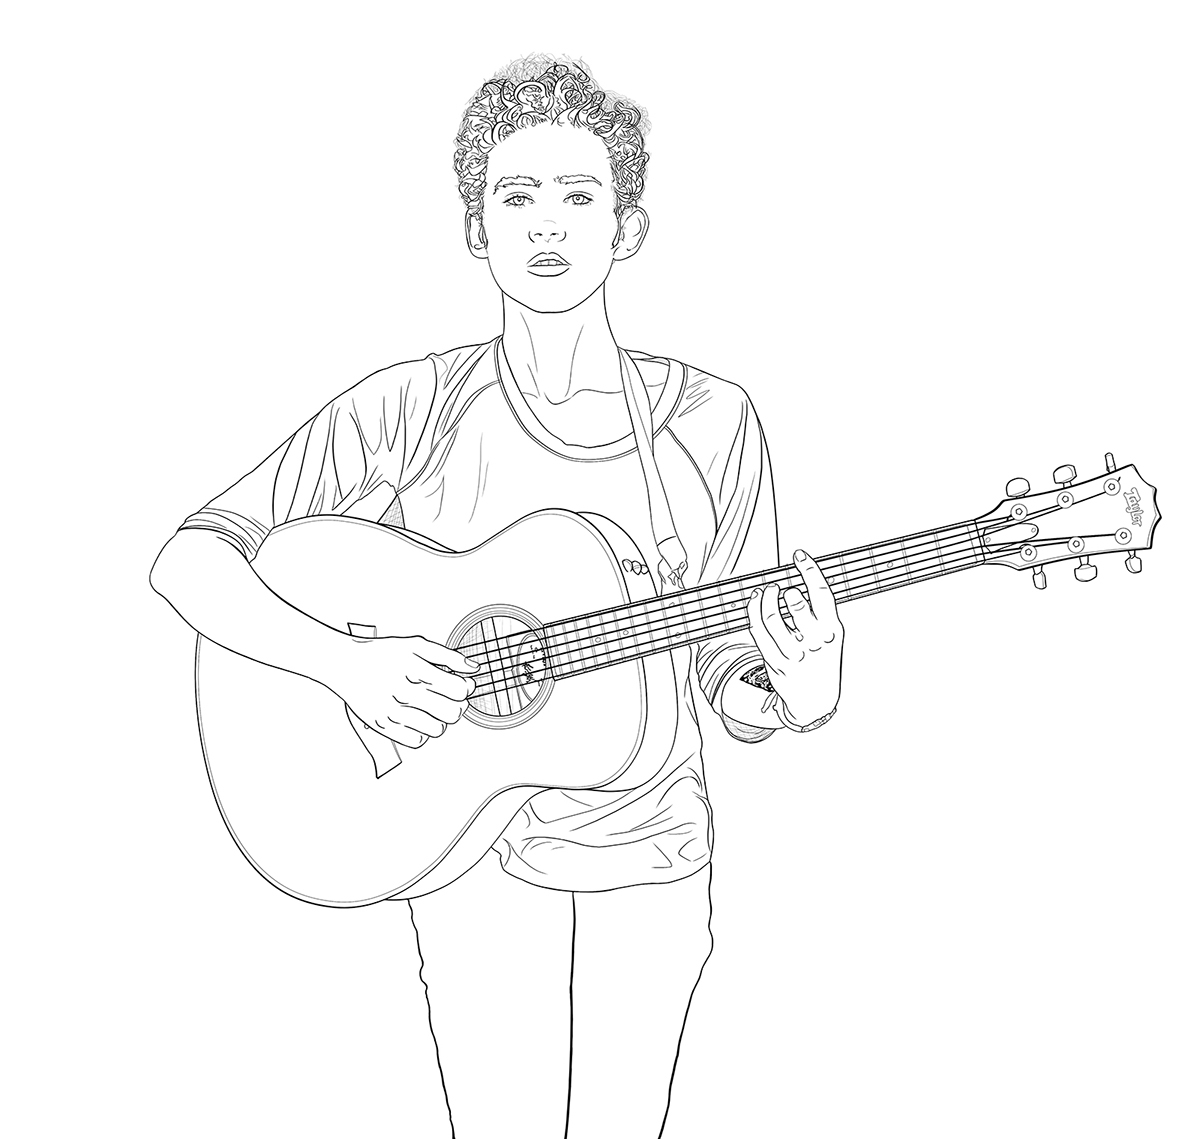 olly alexander portrait lineart poster art musician guitar people films Movies God-Help-The-Girl